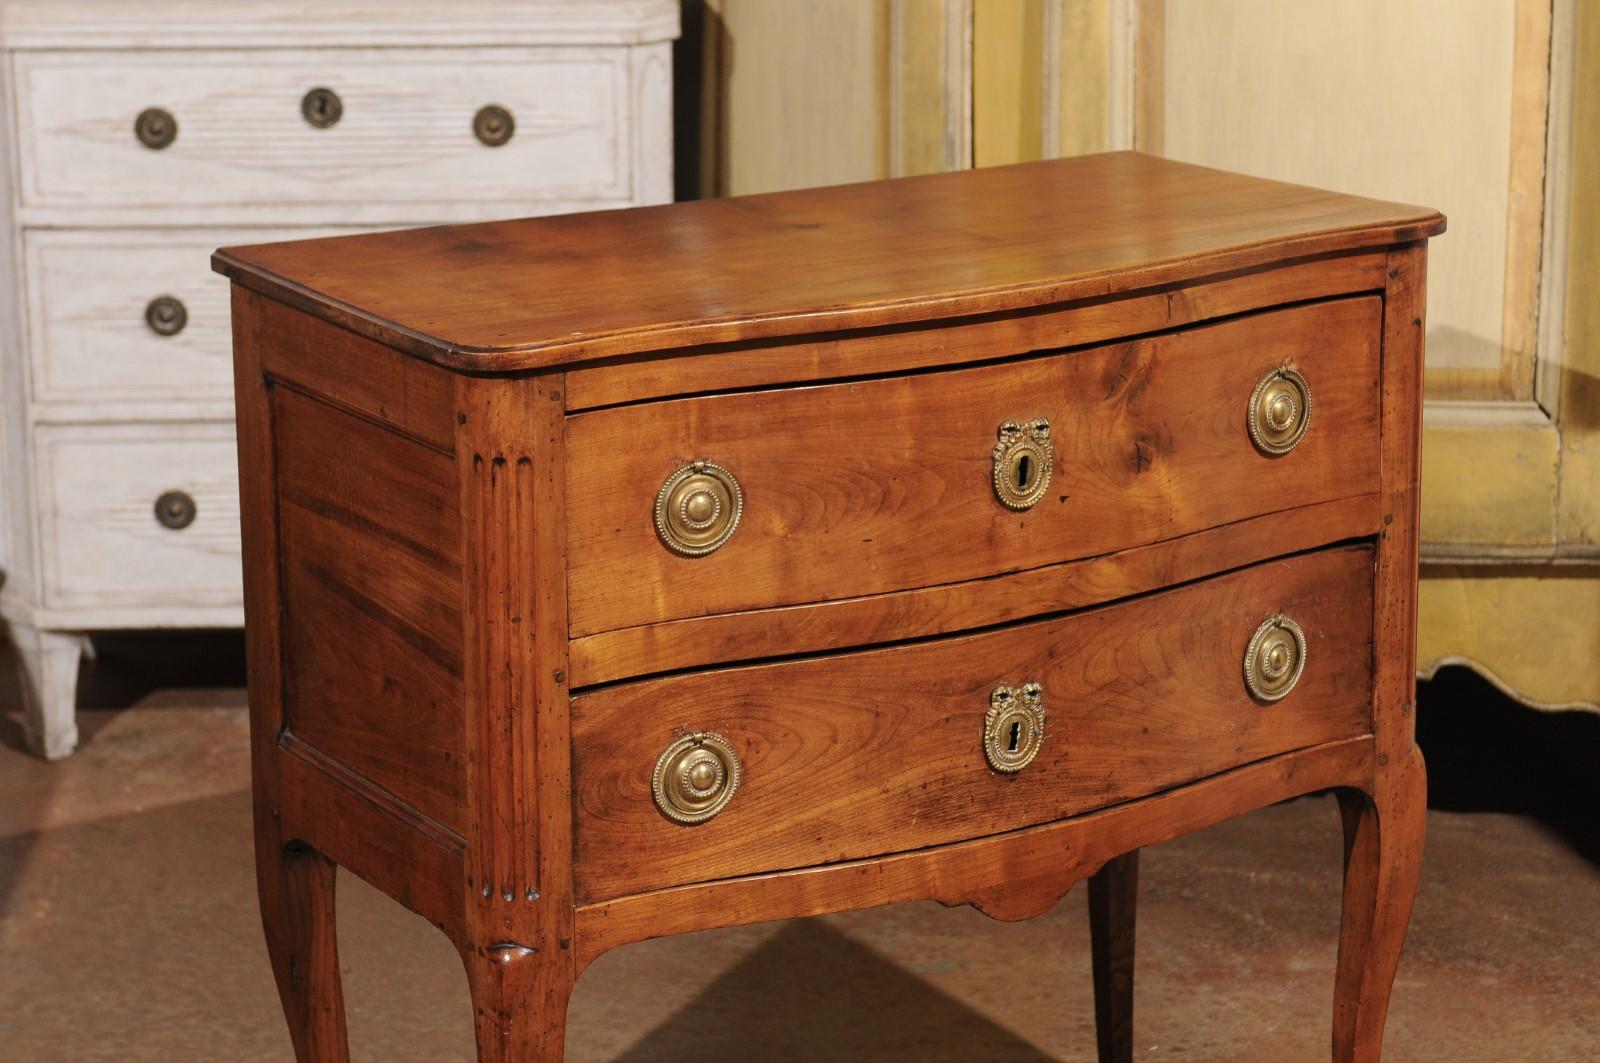 19th Century French Louis XV Style Cherry Two-Drawer Commode with Cabriole Legs, circa 1830